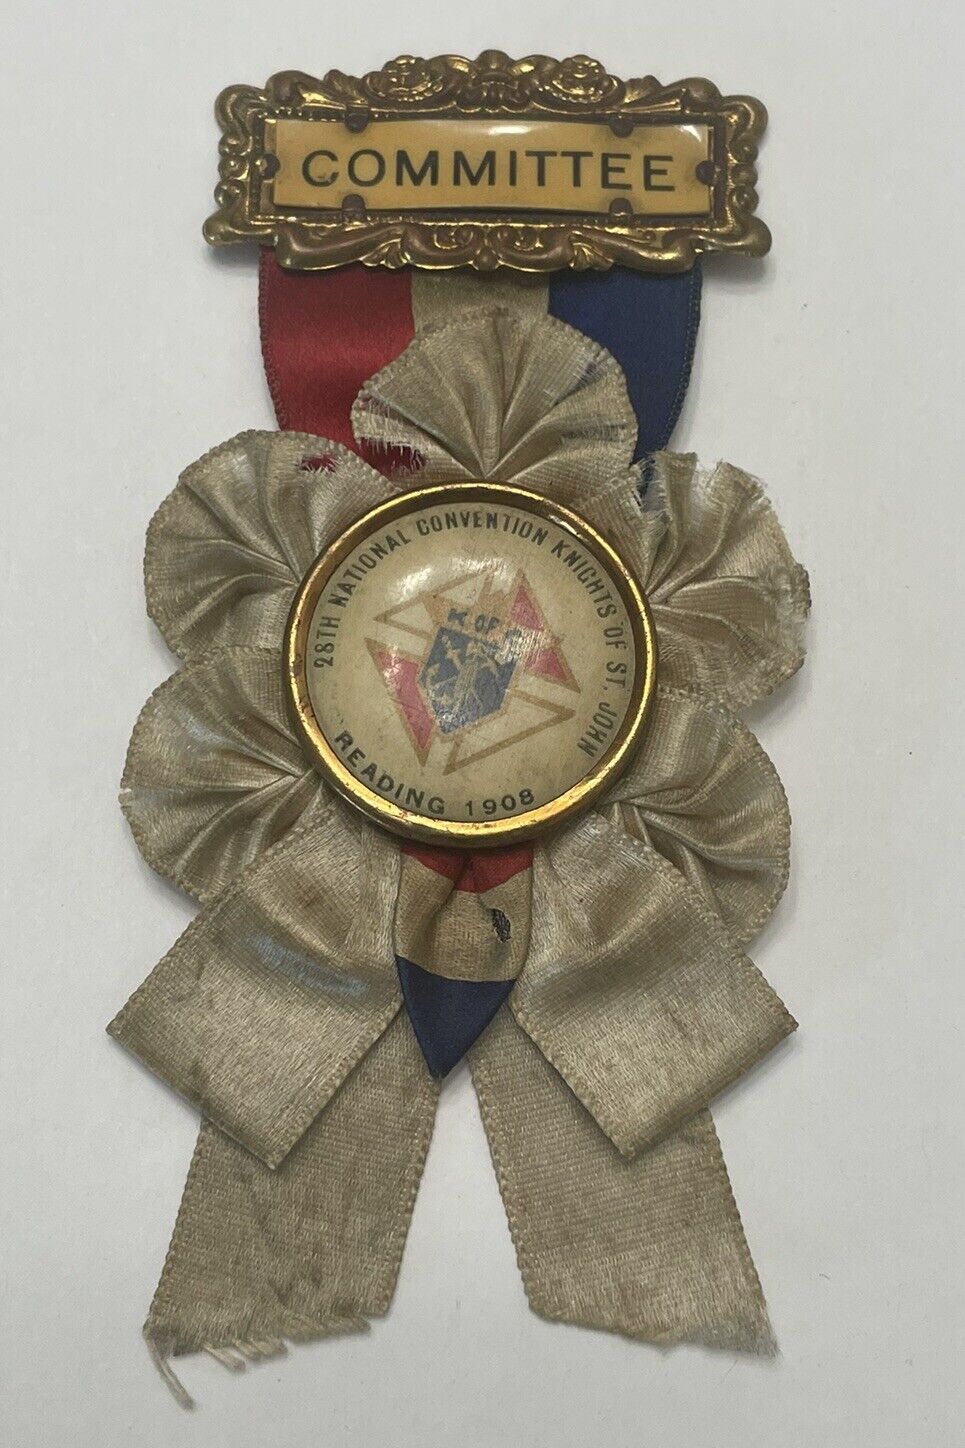 Antique 1908 Knights of St John Medal & Ribbon 28th Annual Convention Committee